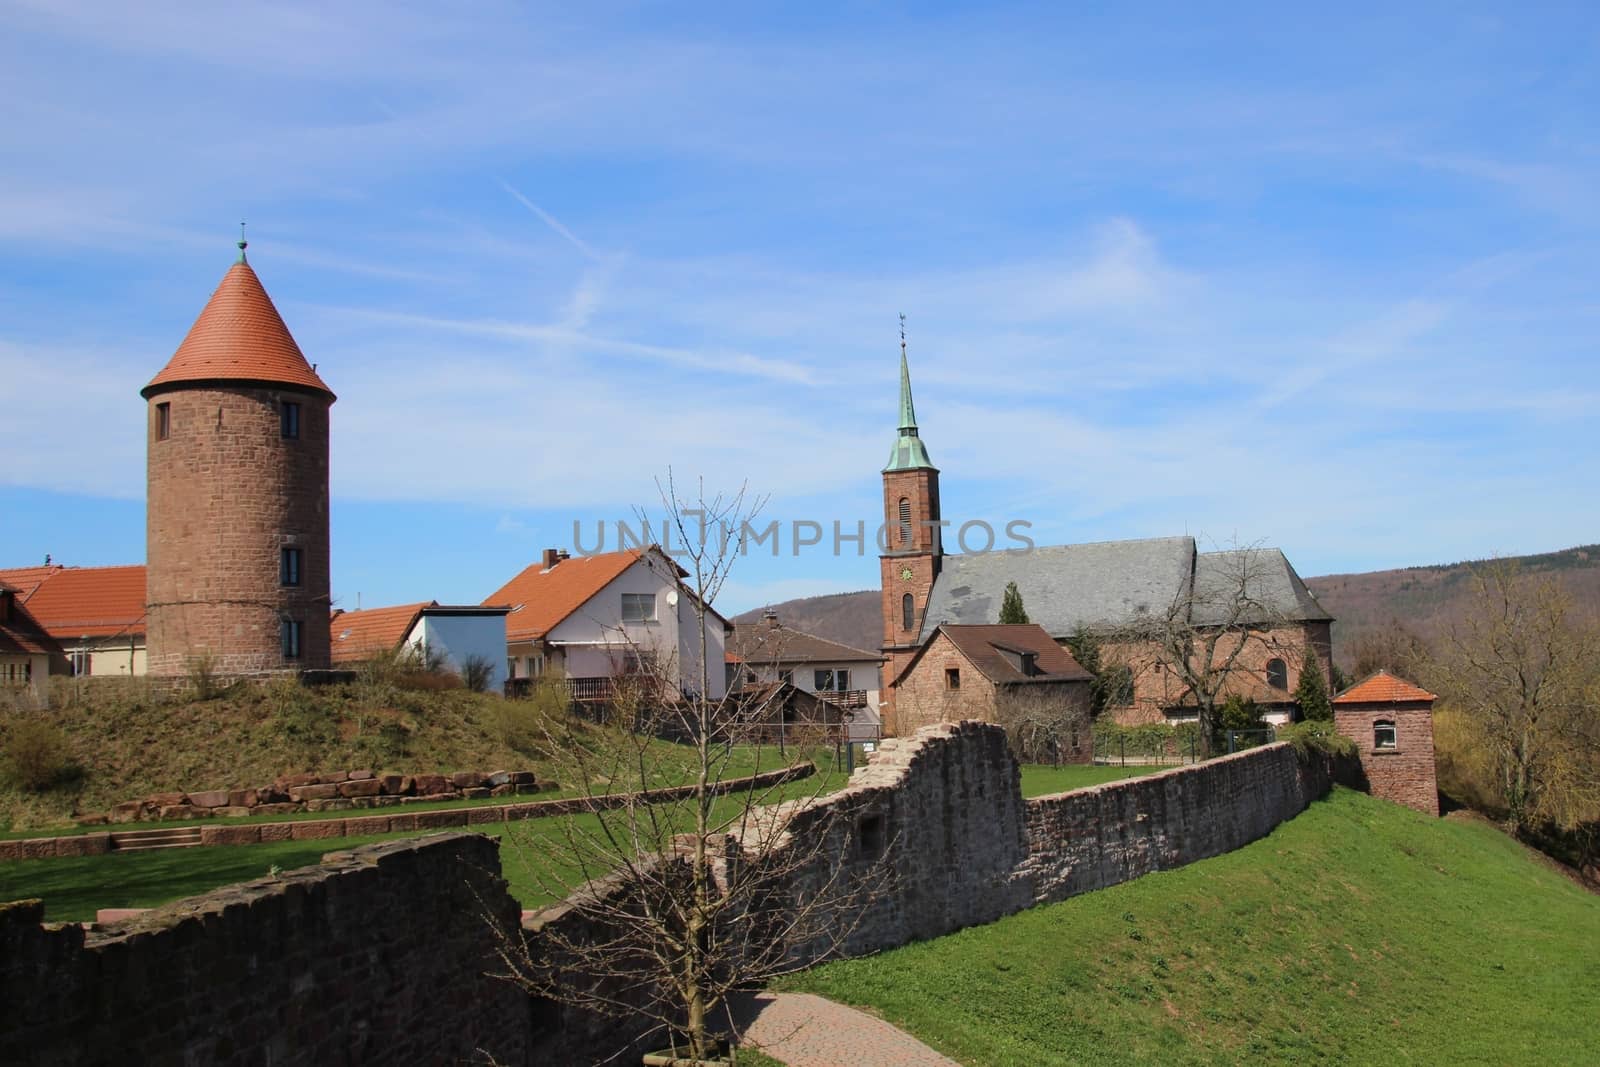 Dilsberg is a 1000 year old little medieval town that is surrounded by a city-wall. Germany.